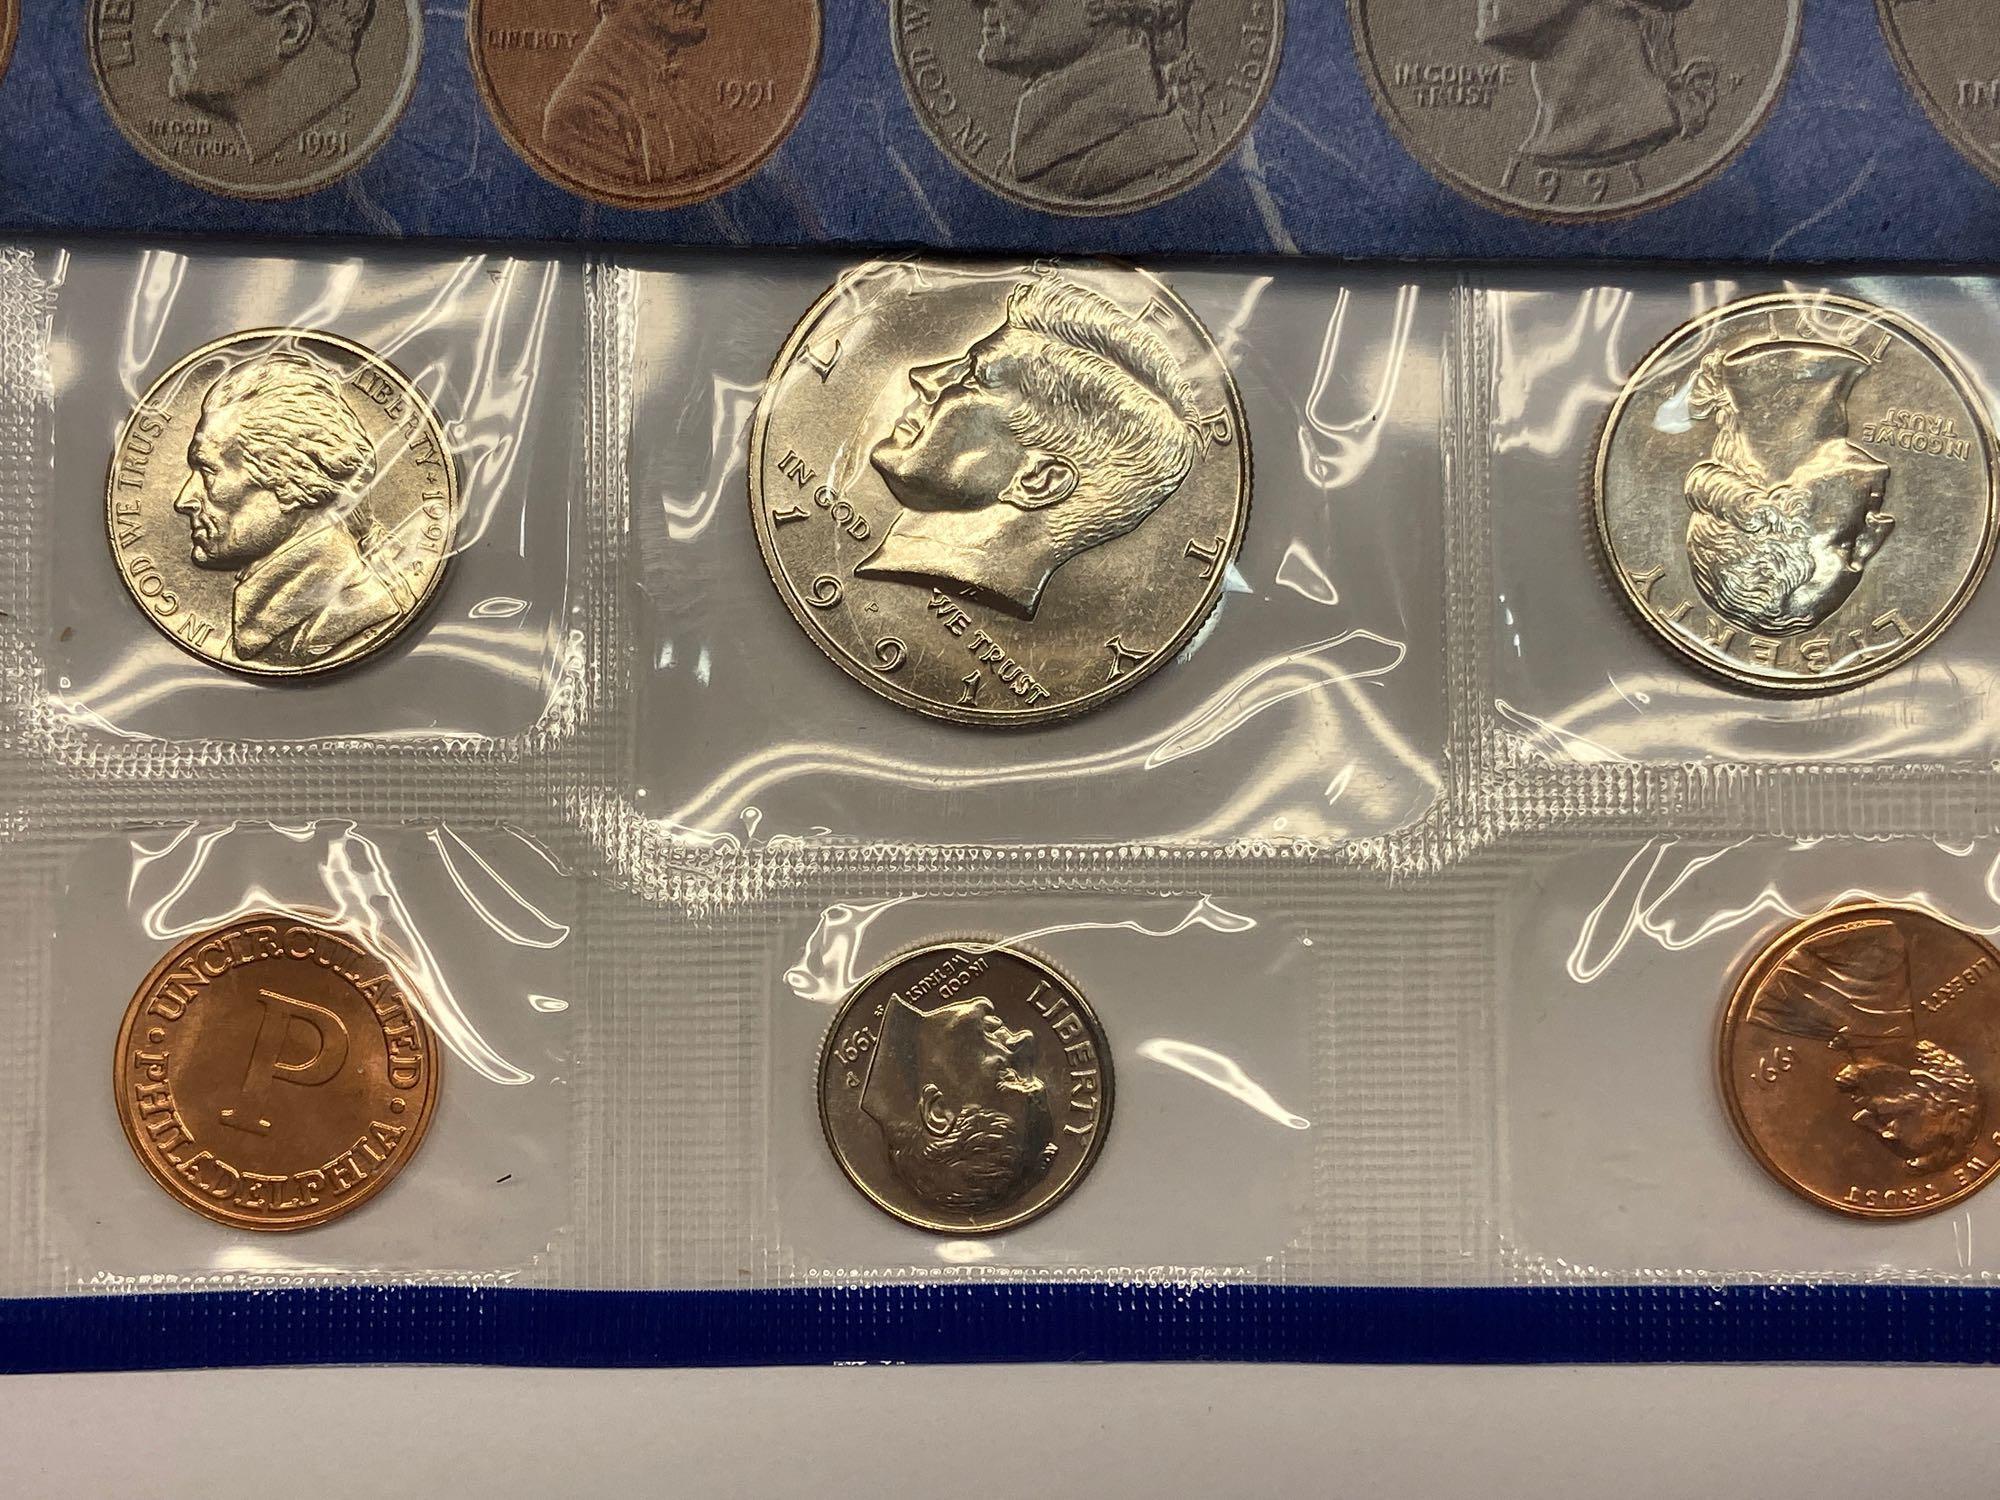 Collection of 10 United States Mint Uncirculated P & D Coin Sets 1978-1992 in Original Packaging